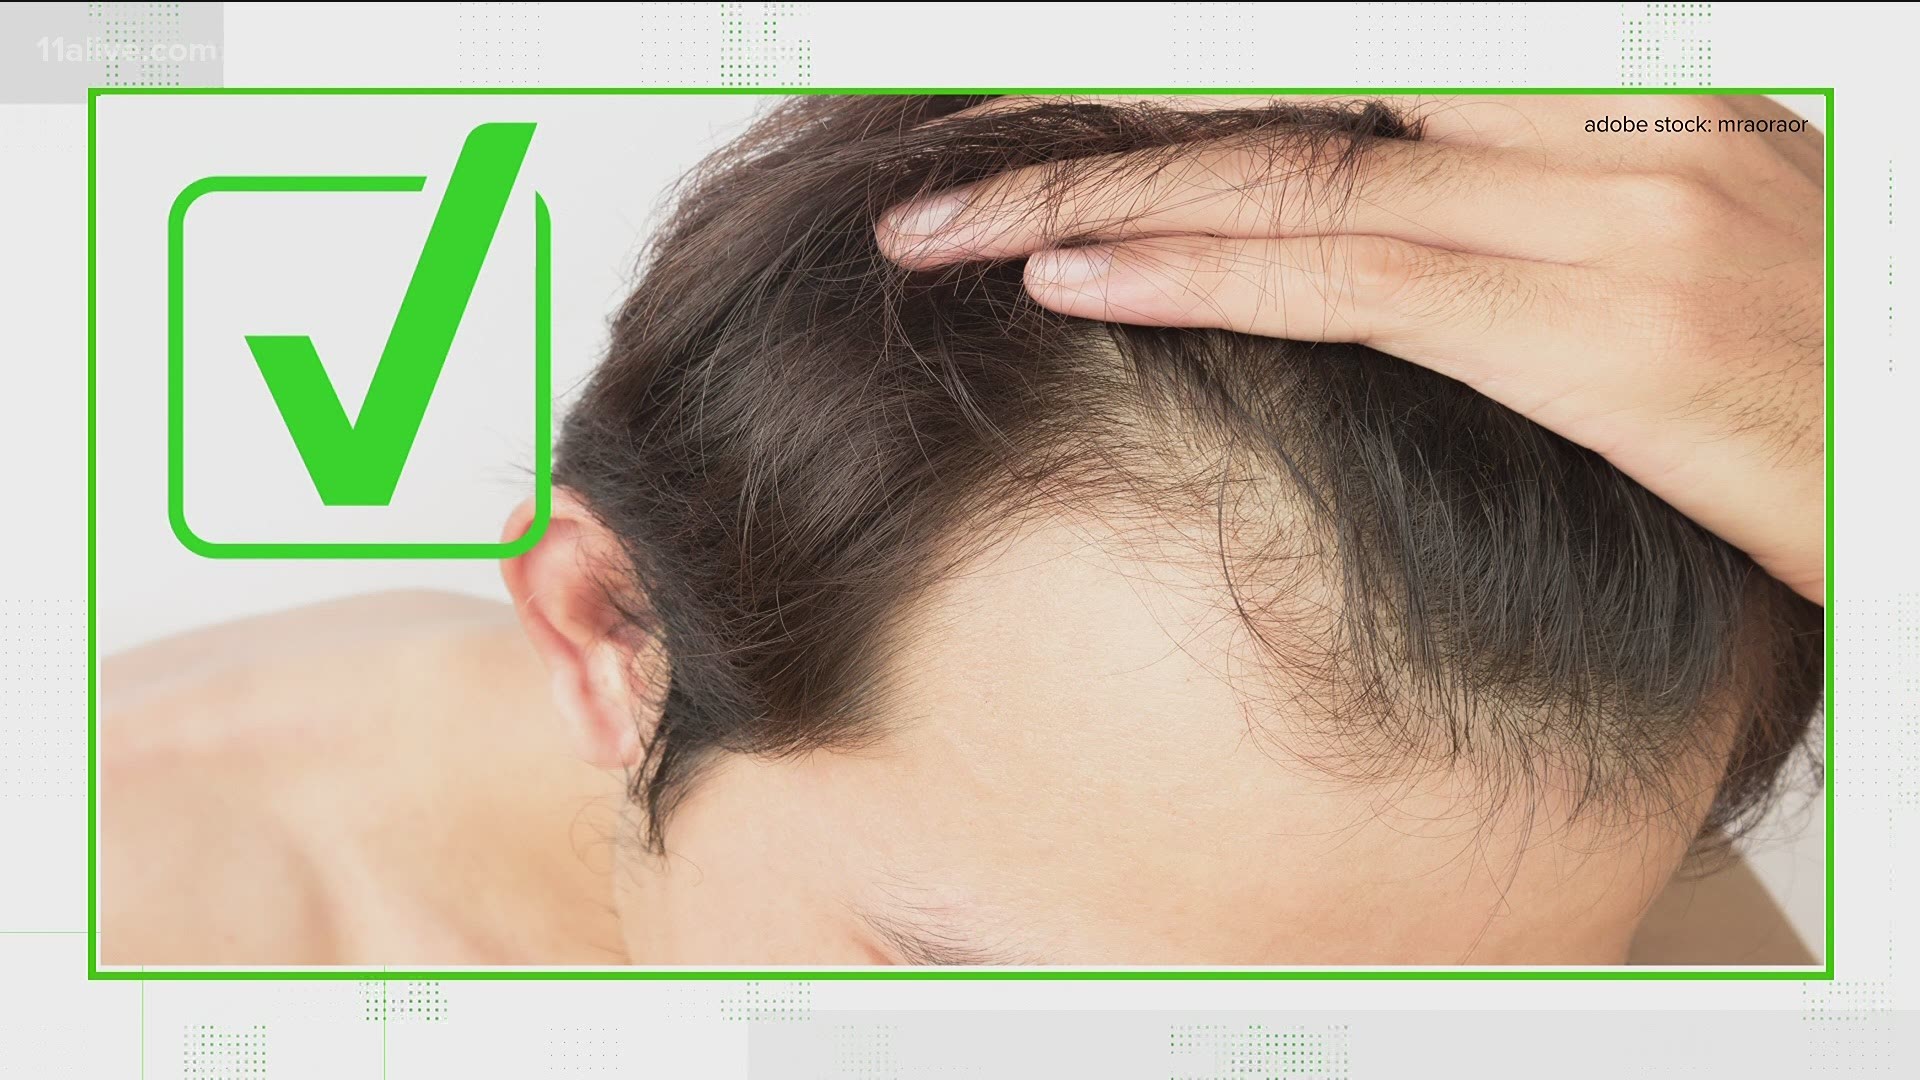 Medical experts and scientific studies say both men and women with a sign of increased androgens - which cause baldness - have an increased COVID-19 risk.